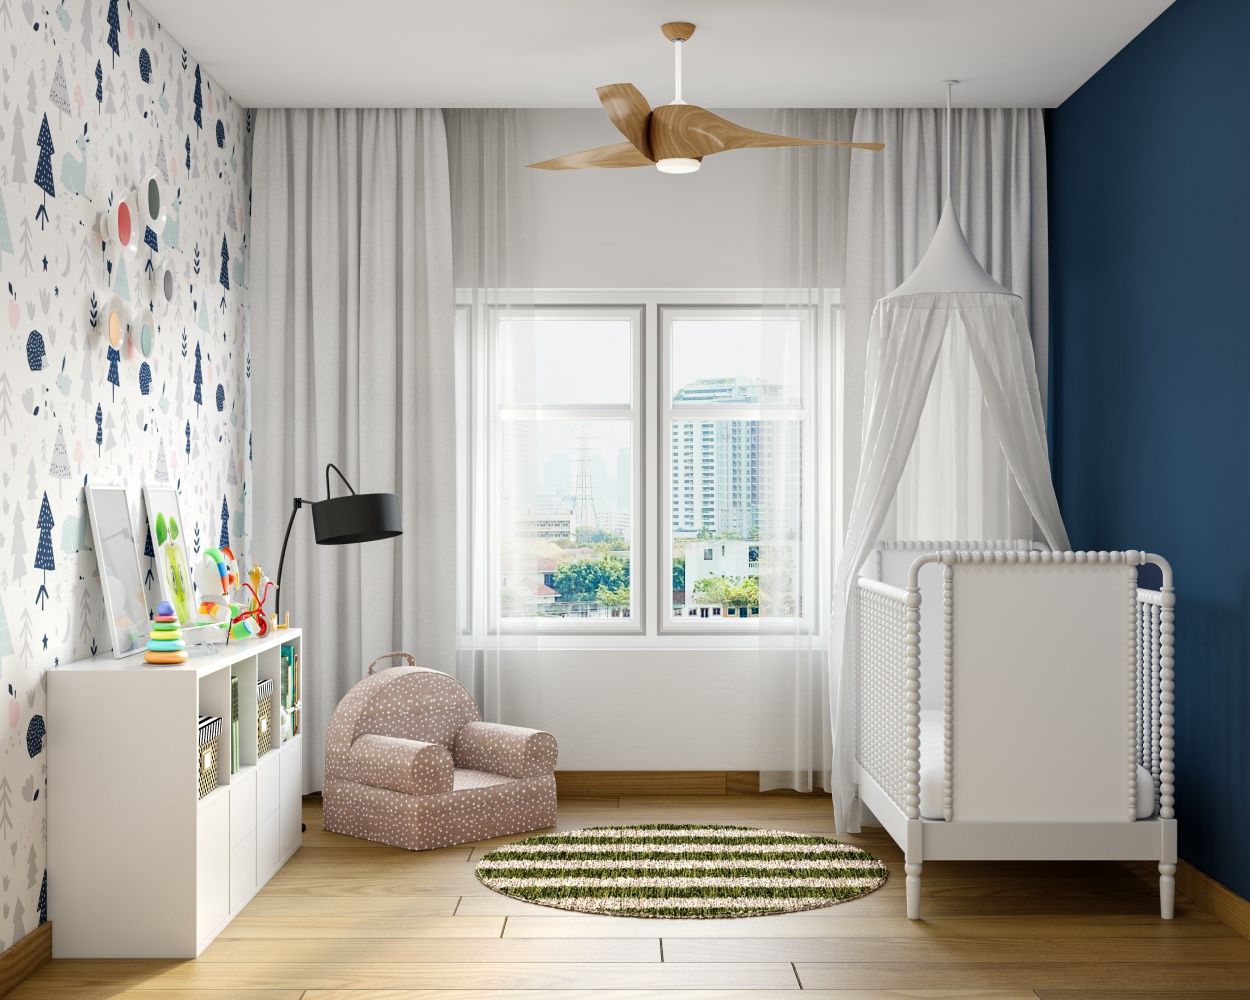 Modern White And Navy Blue Wall Design With VOC Paint